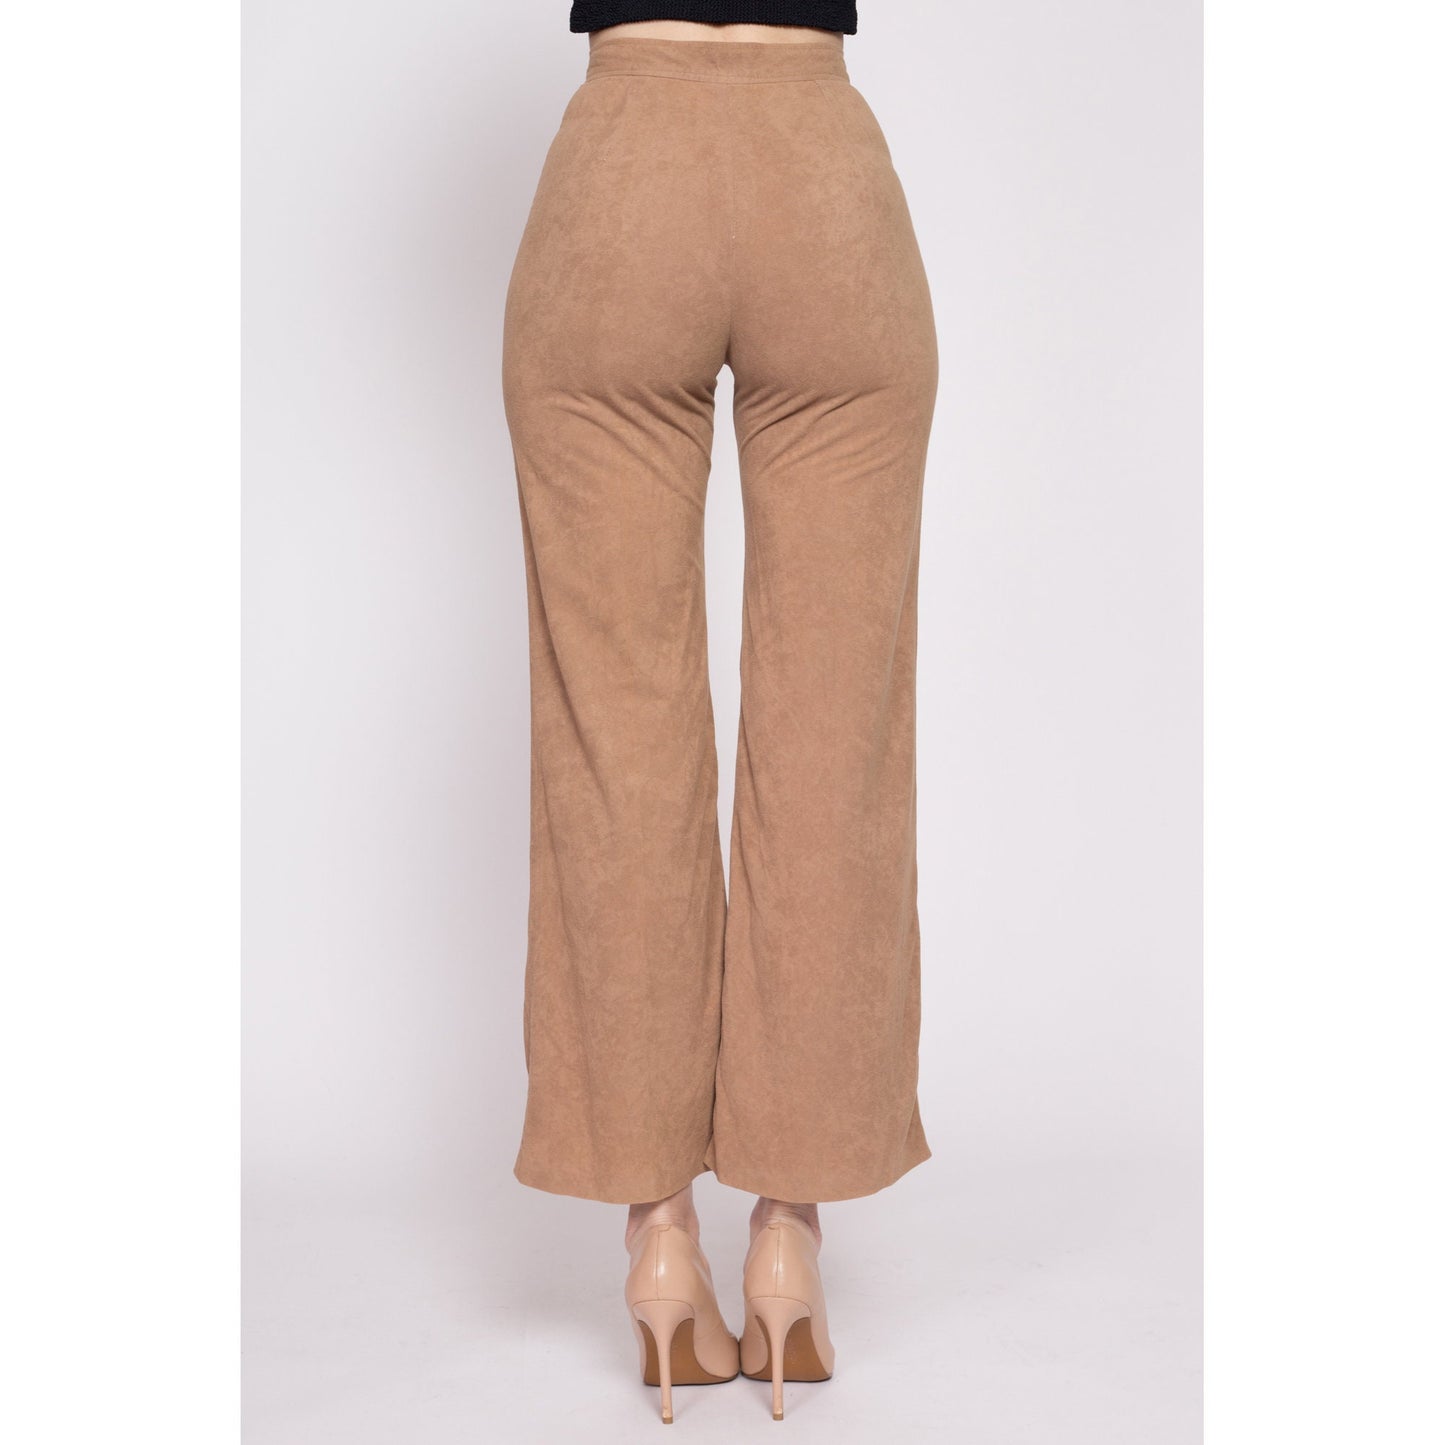 70s Tan Ultrasuede High Waisted Pants - Extra Small, 23.5" | Vintage Flared Light Brown Retro Trousers